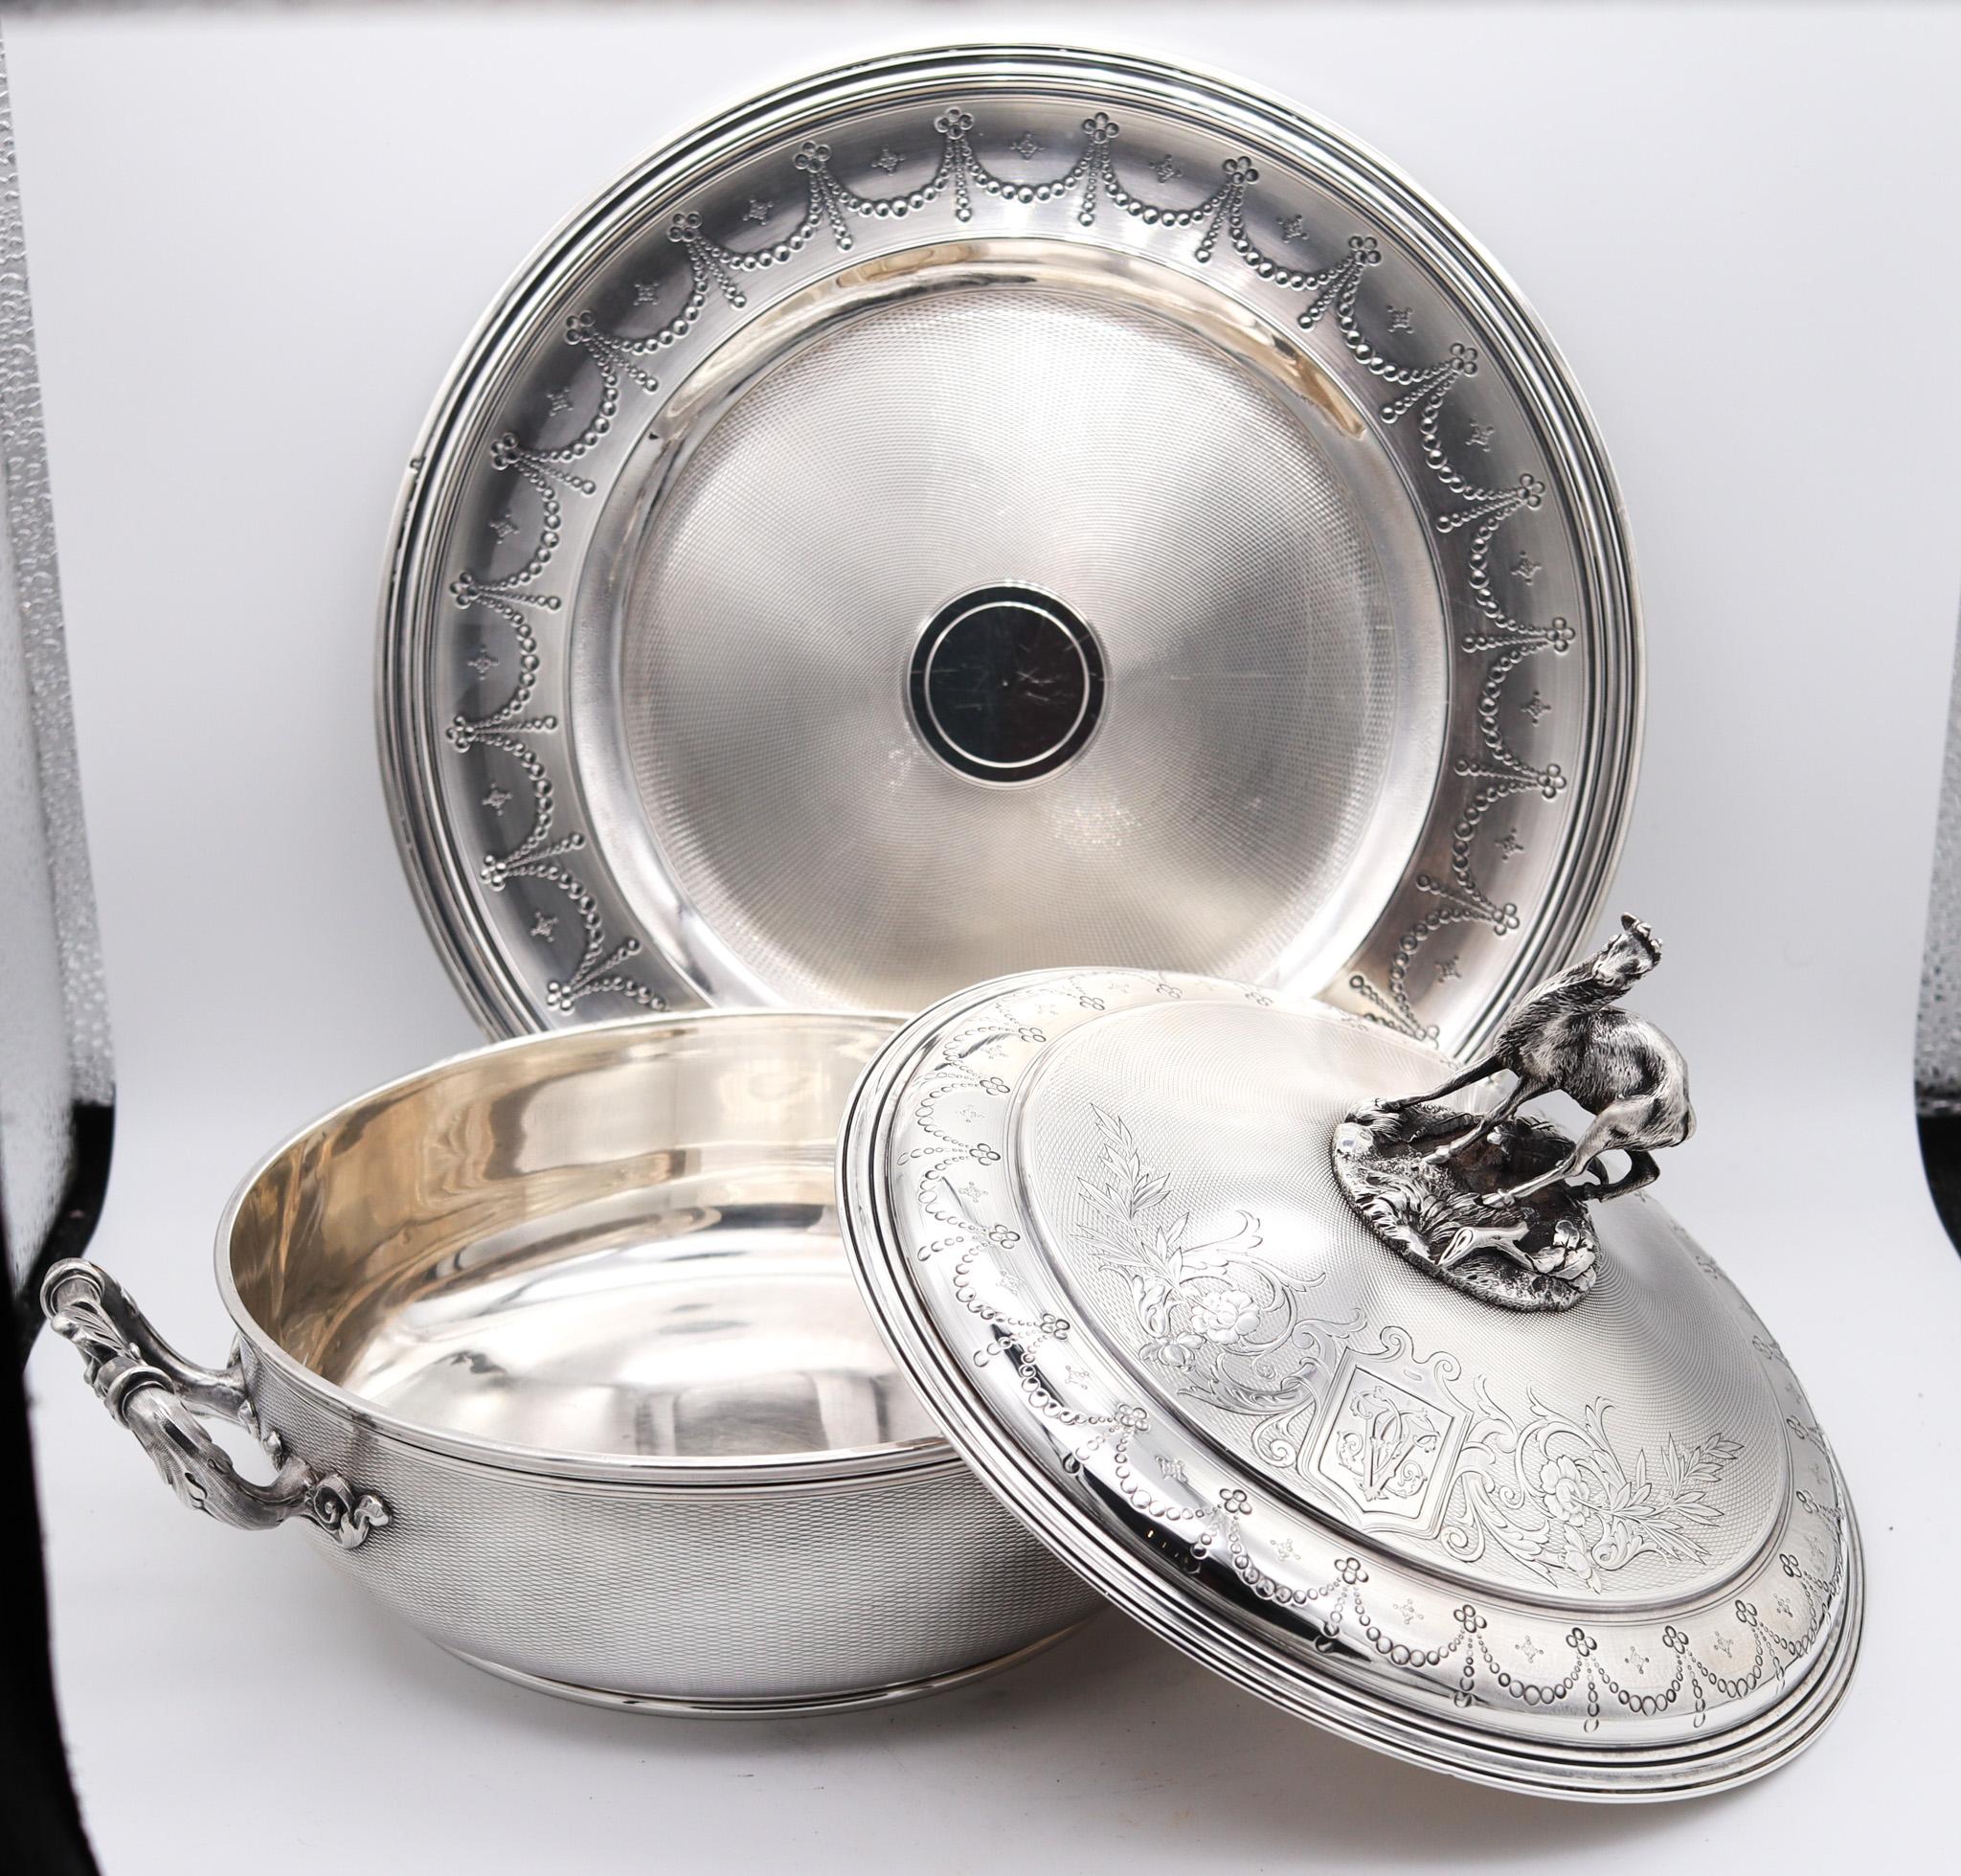 Tallois & Mayence 1885 Paris Covered Dish With Plate In .950 Sterling Silver In Excellent Condition For Sale In Miami, FL